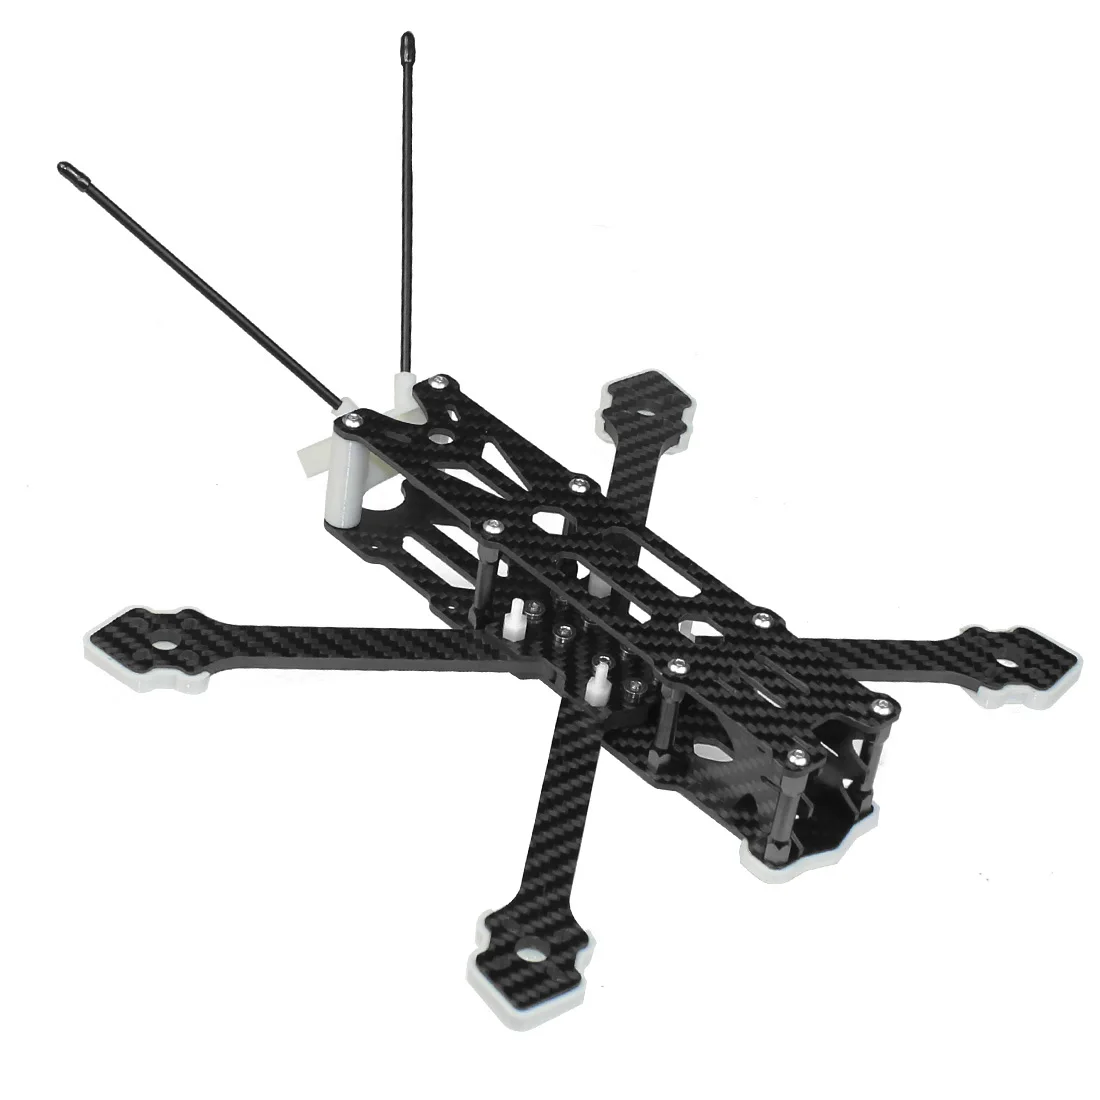 

F220 220mm Wheelbase 5inch X Type Carbon Fiber Quadcopter Frame Kit Support BN-220GPS For FPV Freestyle RC Racing Drone Copter